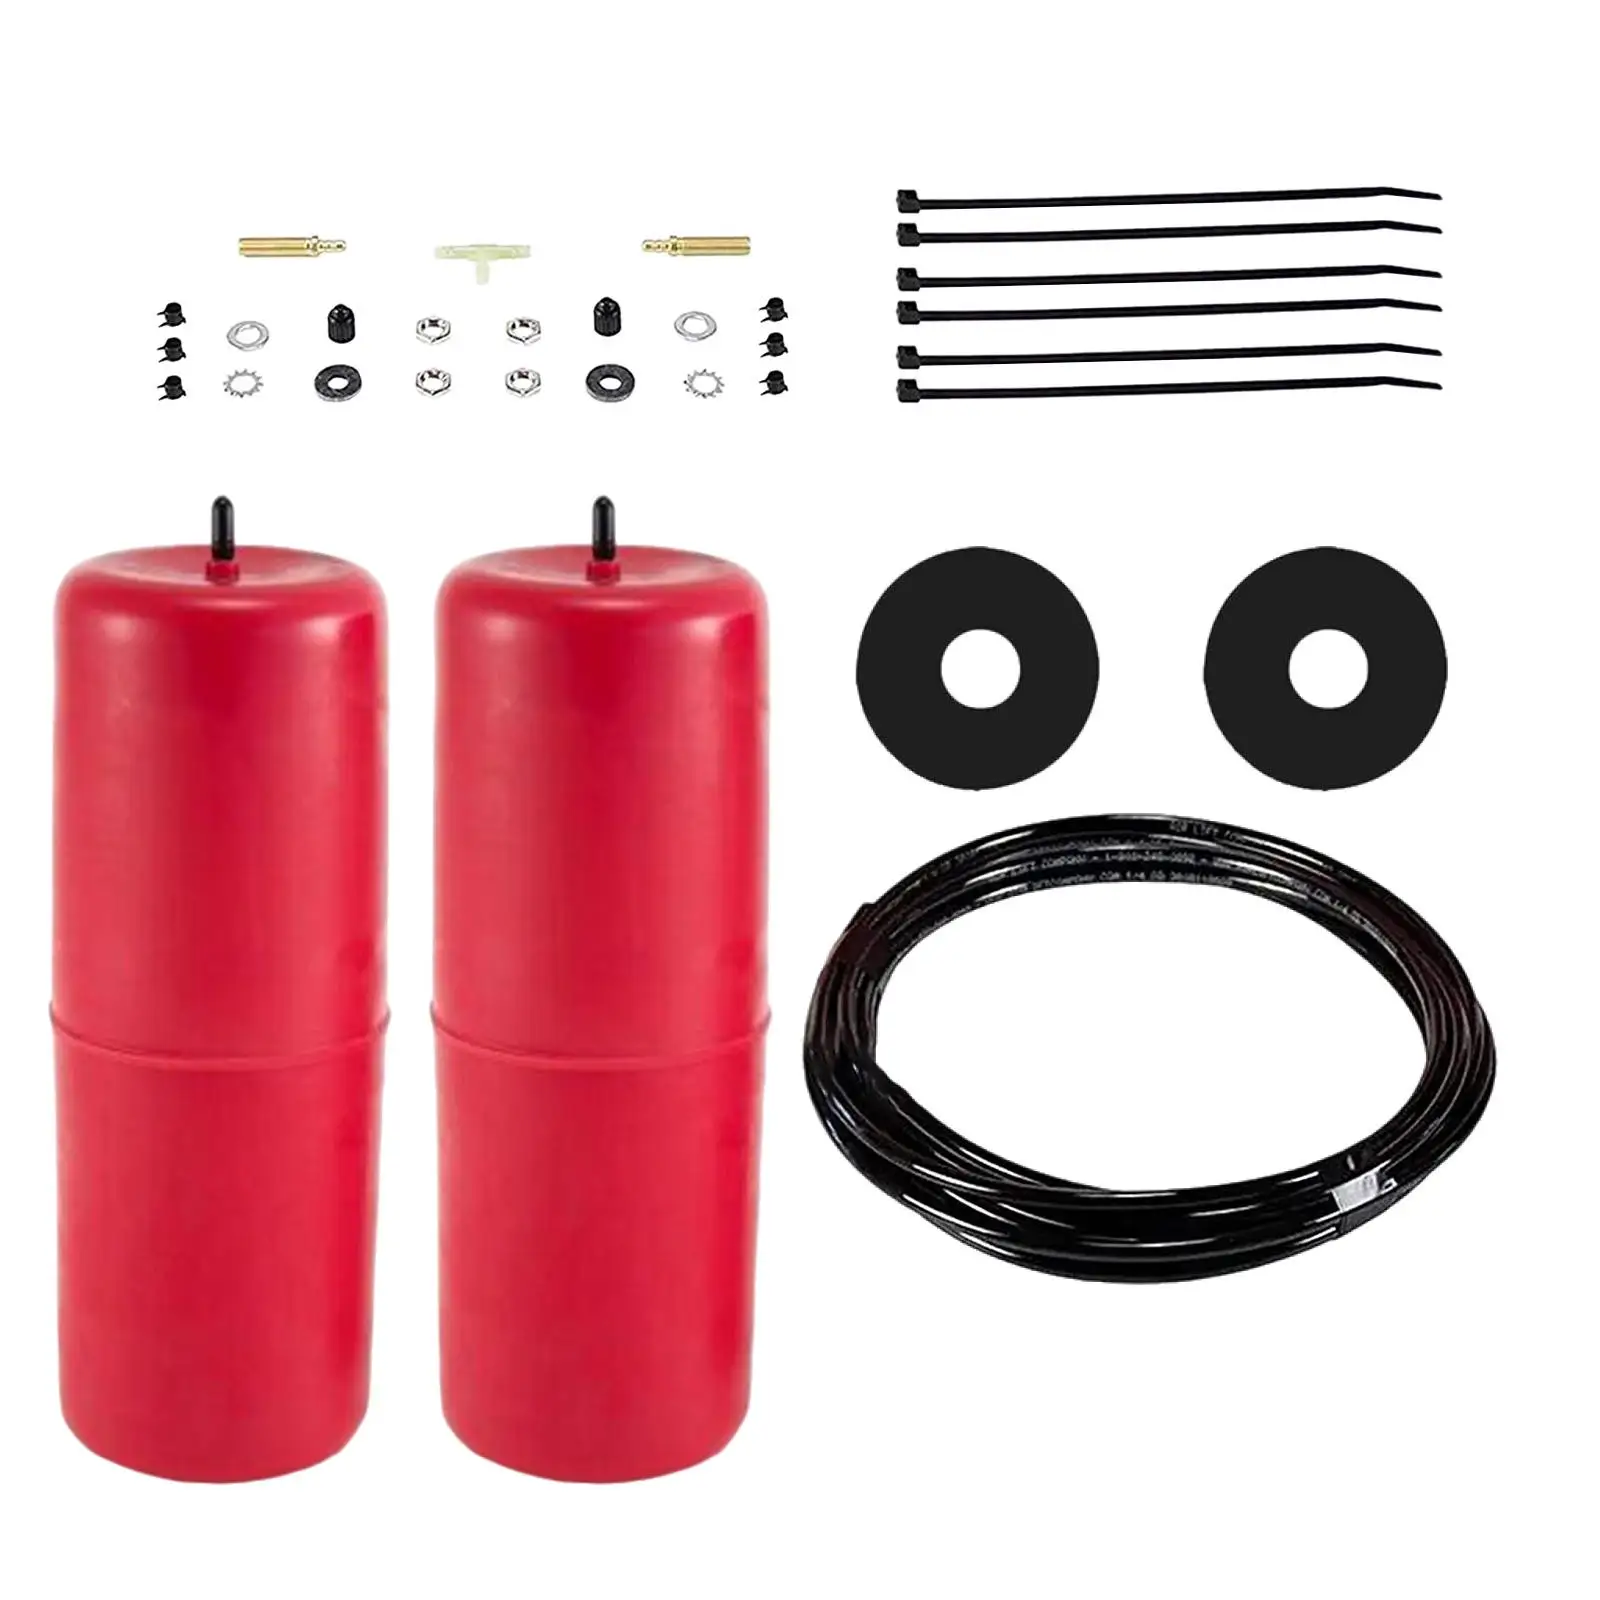 Air Suspension Kit 60818 Easy to Install Stable Performance Direct Replaces Parts Air Helper Spring Kit for RAM 1500 Pickup